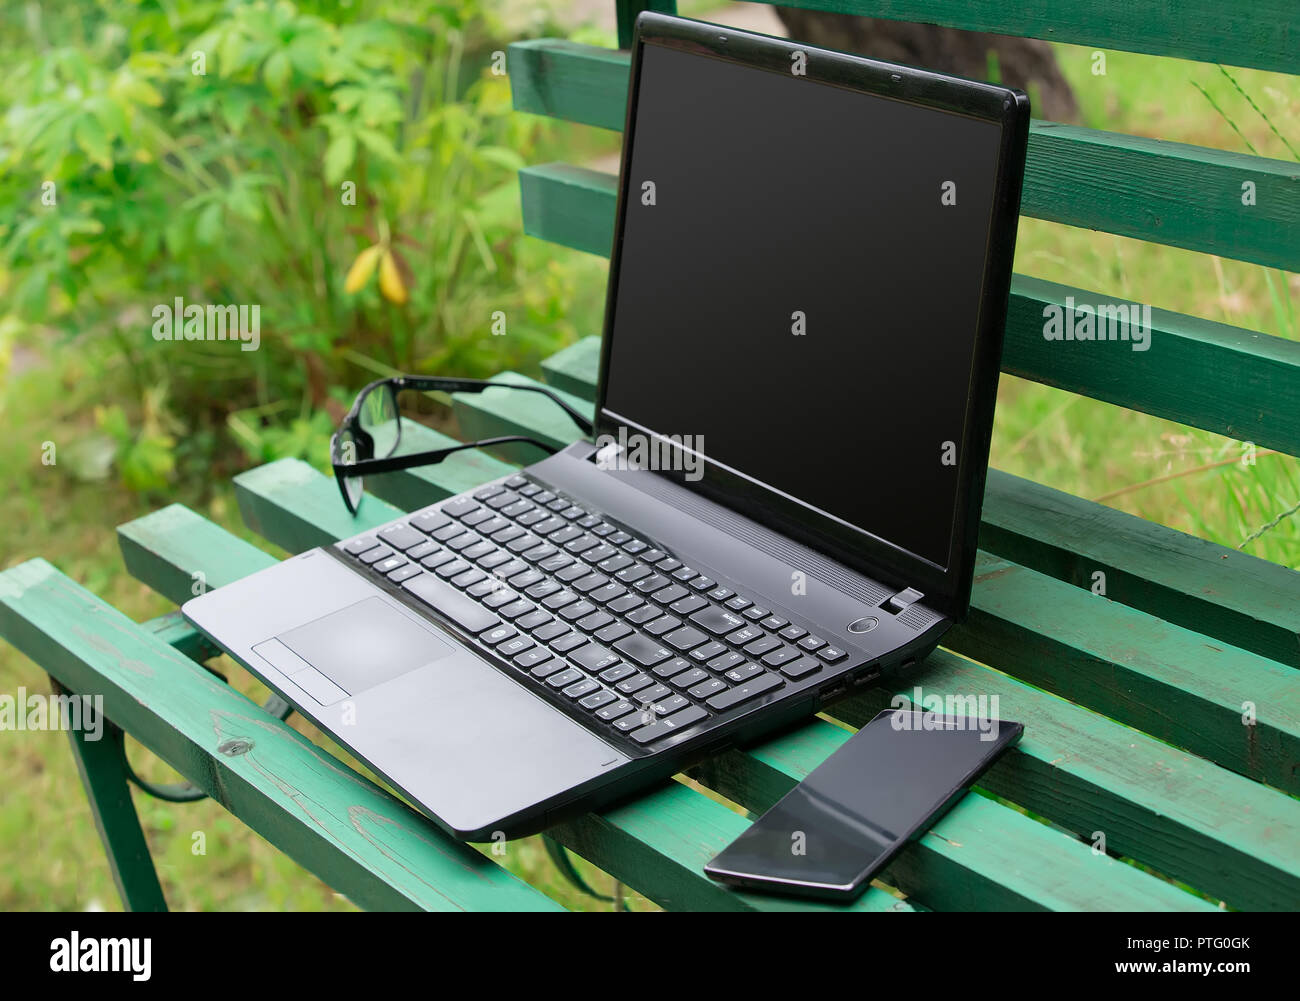 Laptop, smartphone and glasses on a park bench Stock Photo